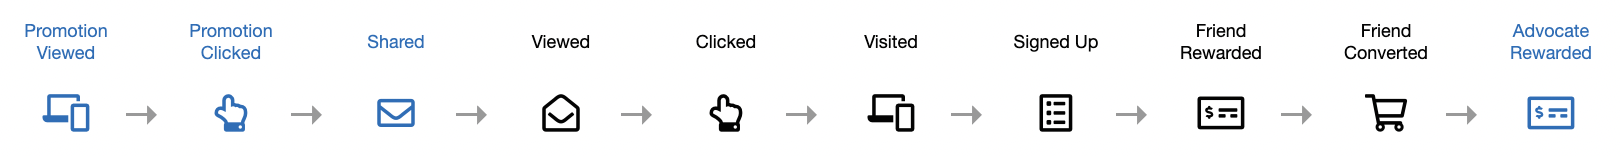 An example program flow broken down into business events represented by by icons